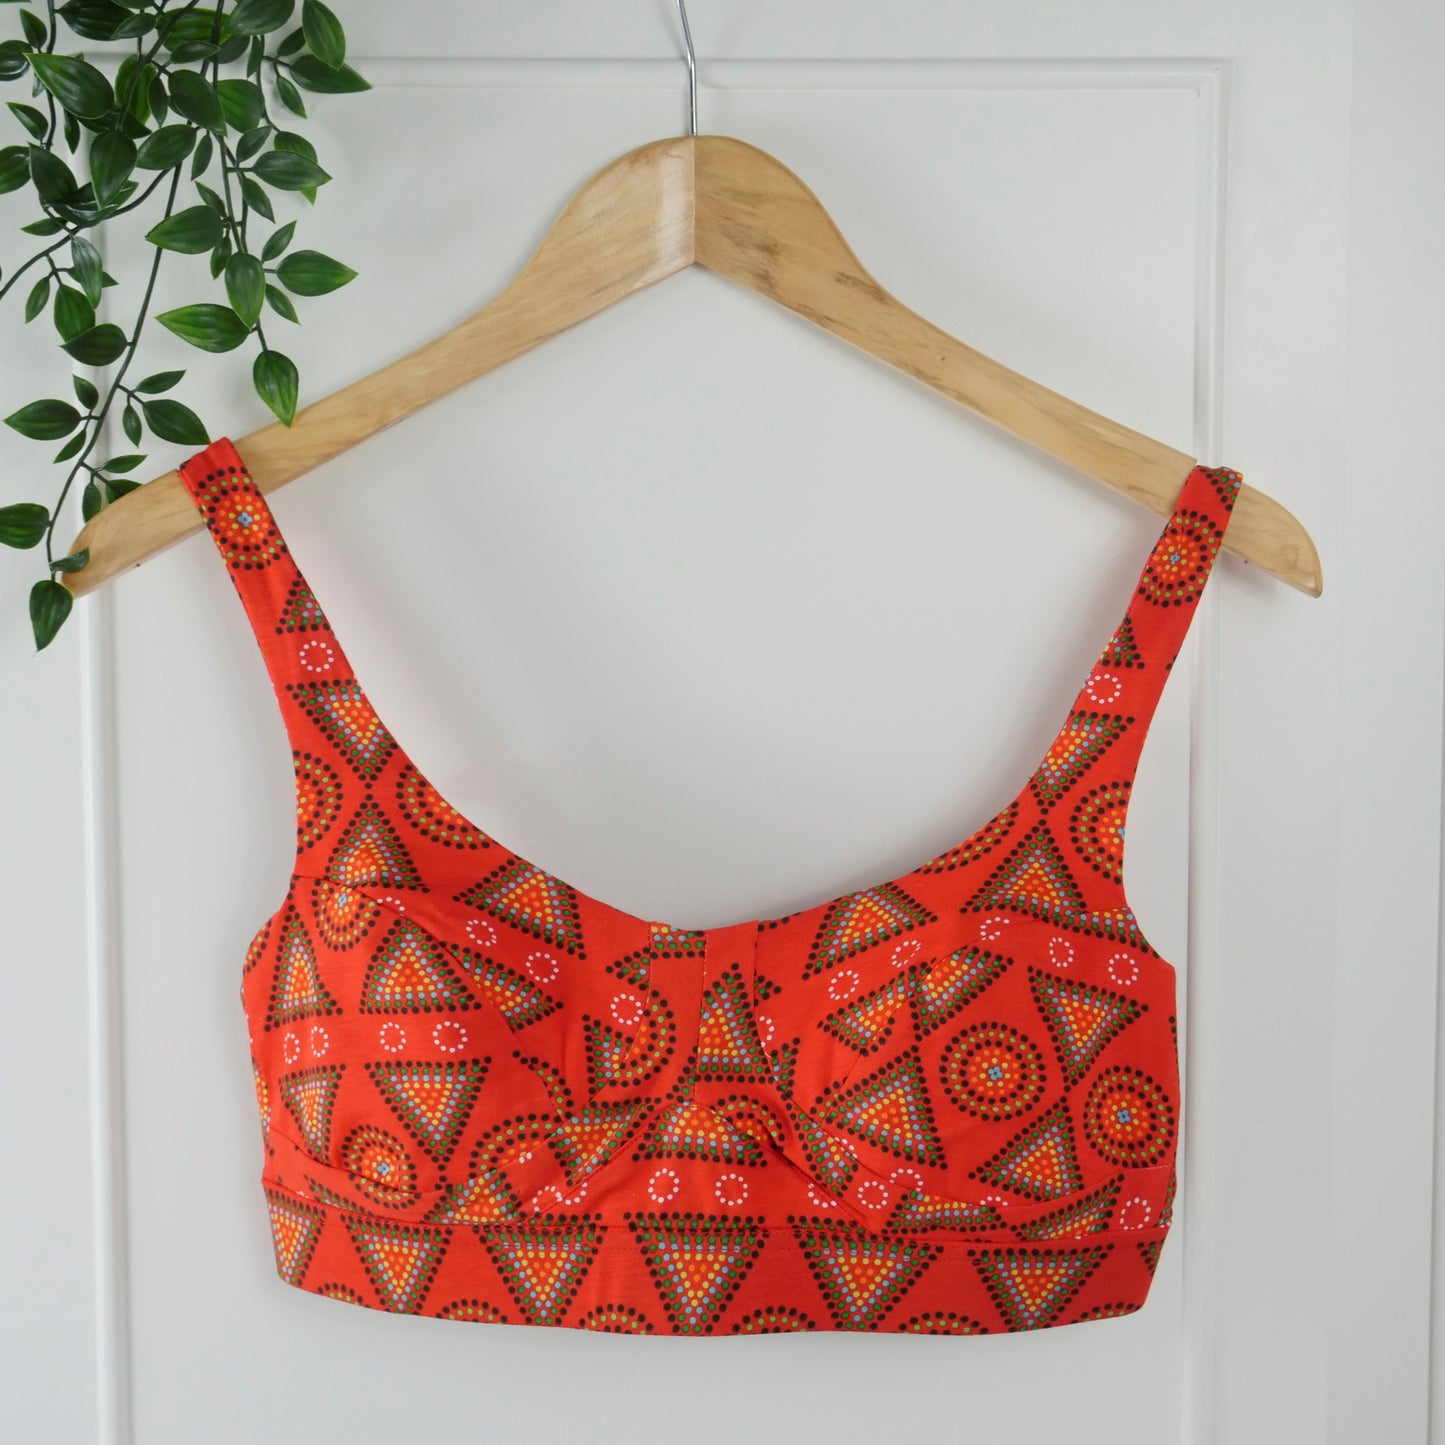 Women's organic cotton bra in red Mara print - more supportive style